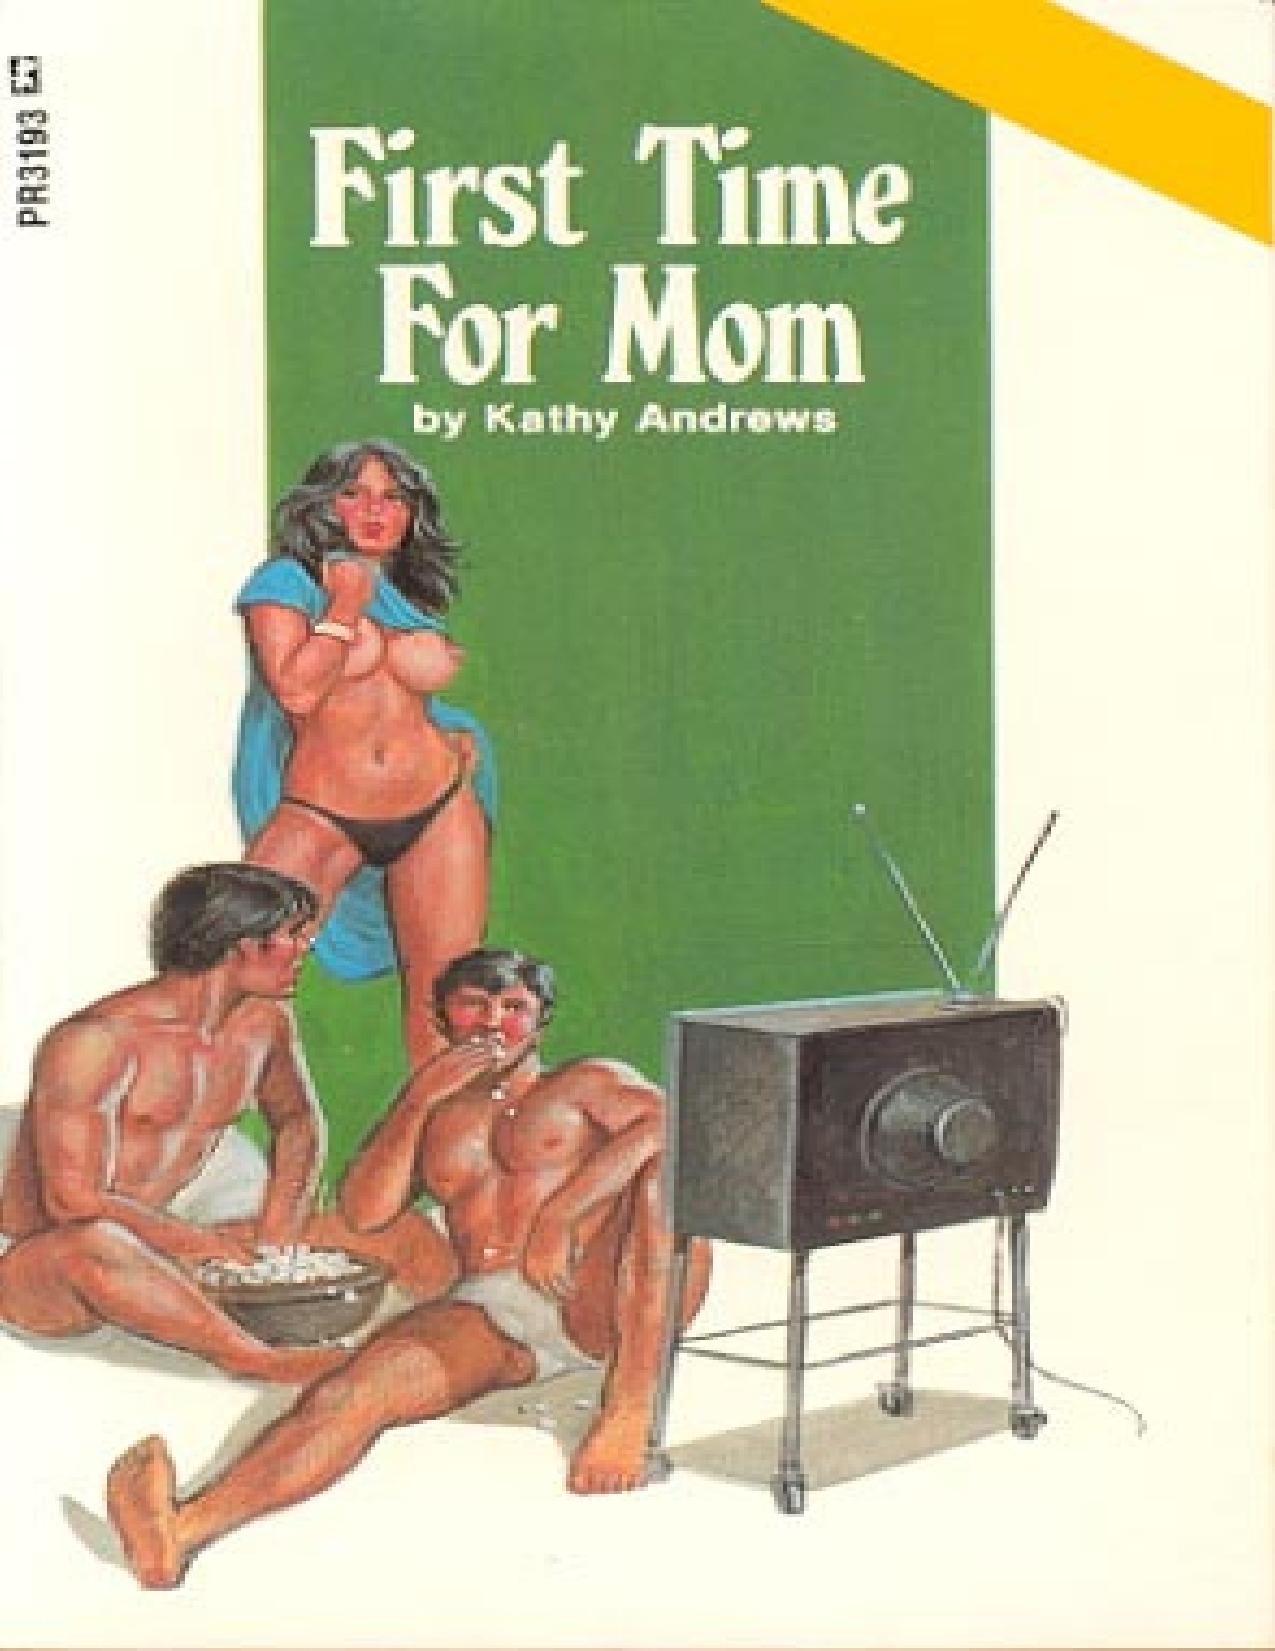 First Time For Mom by Kathy Andrews